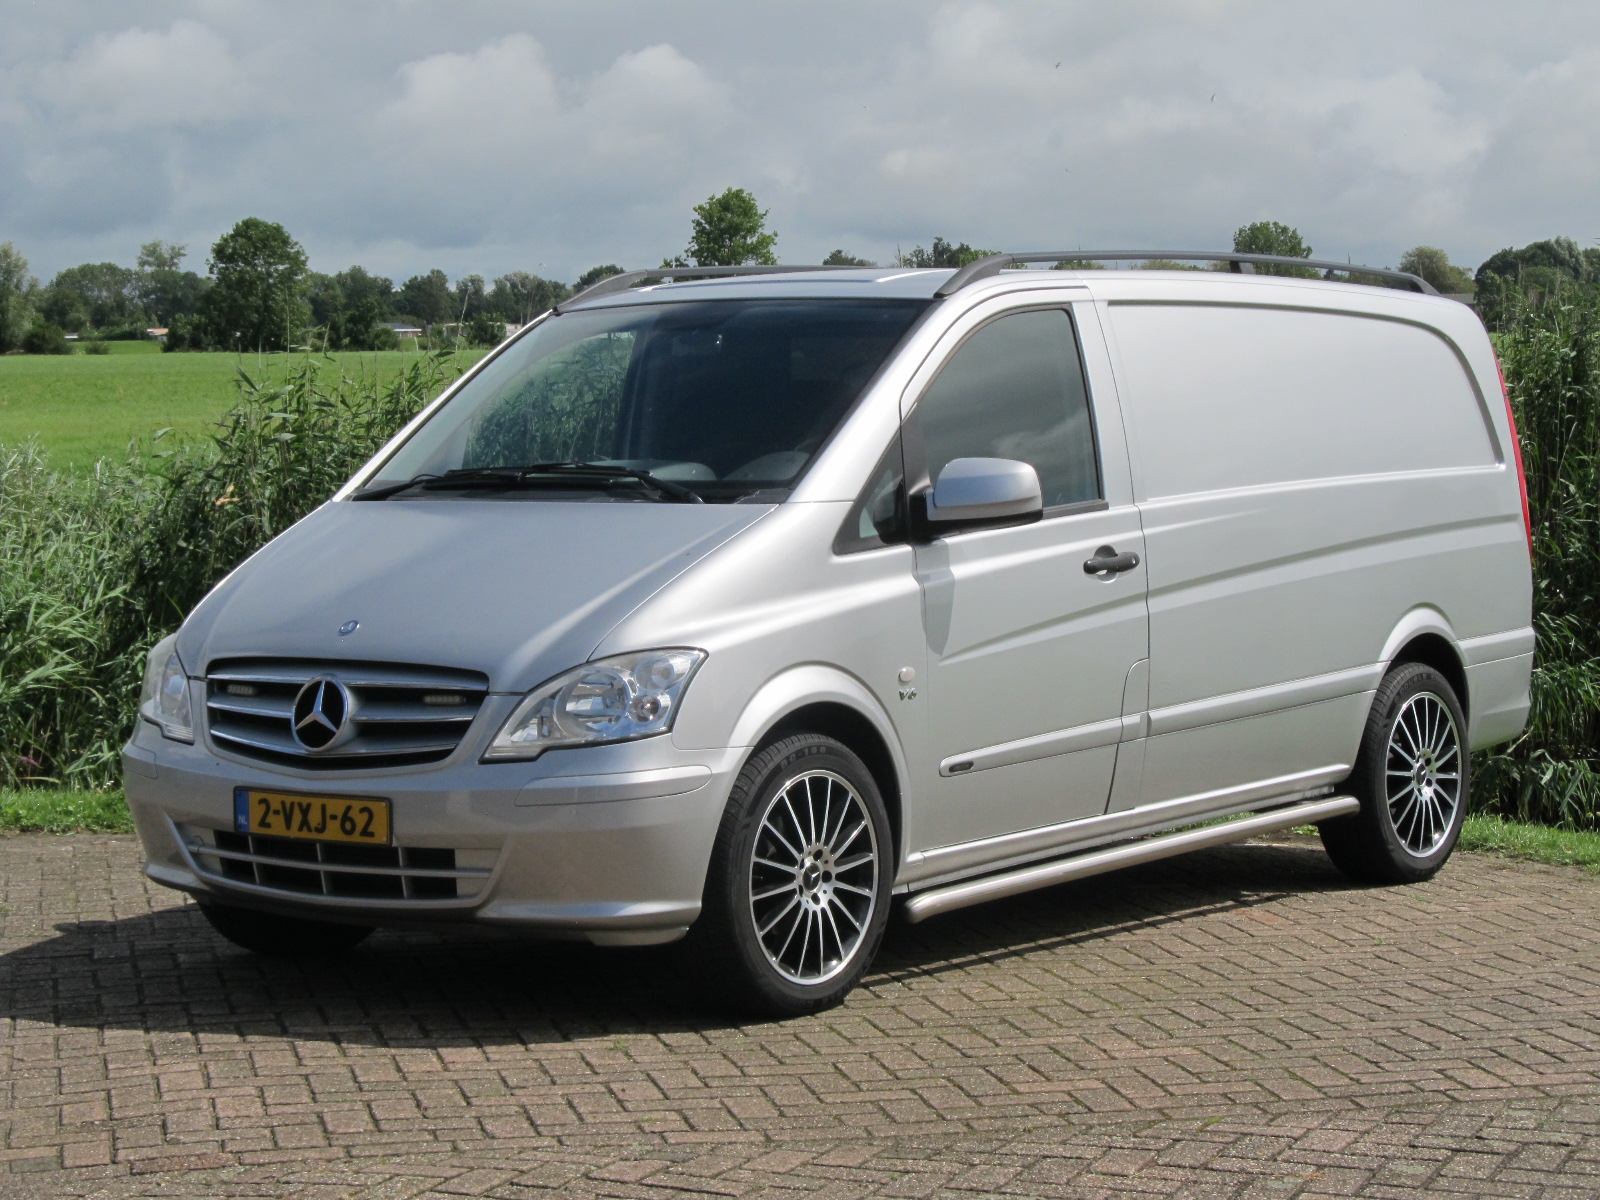 Mercedes-Benz Vito 122 CDI 320 Lang DC Luxe V6 diesel